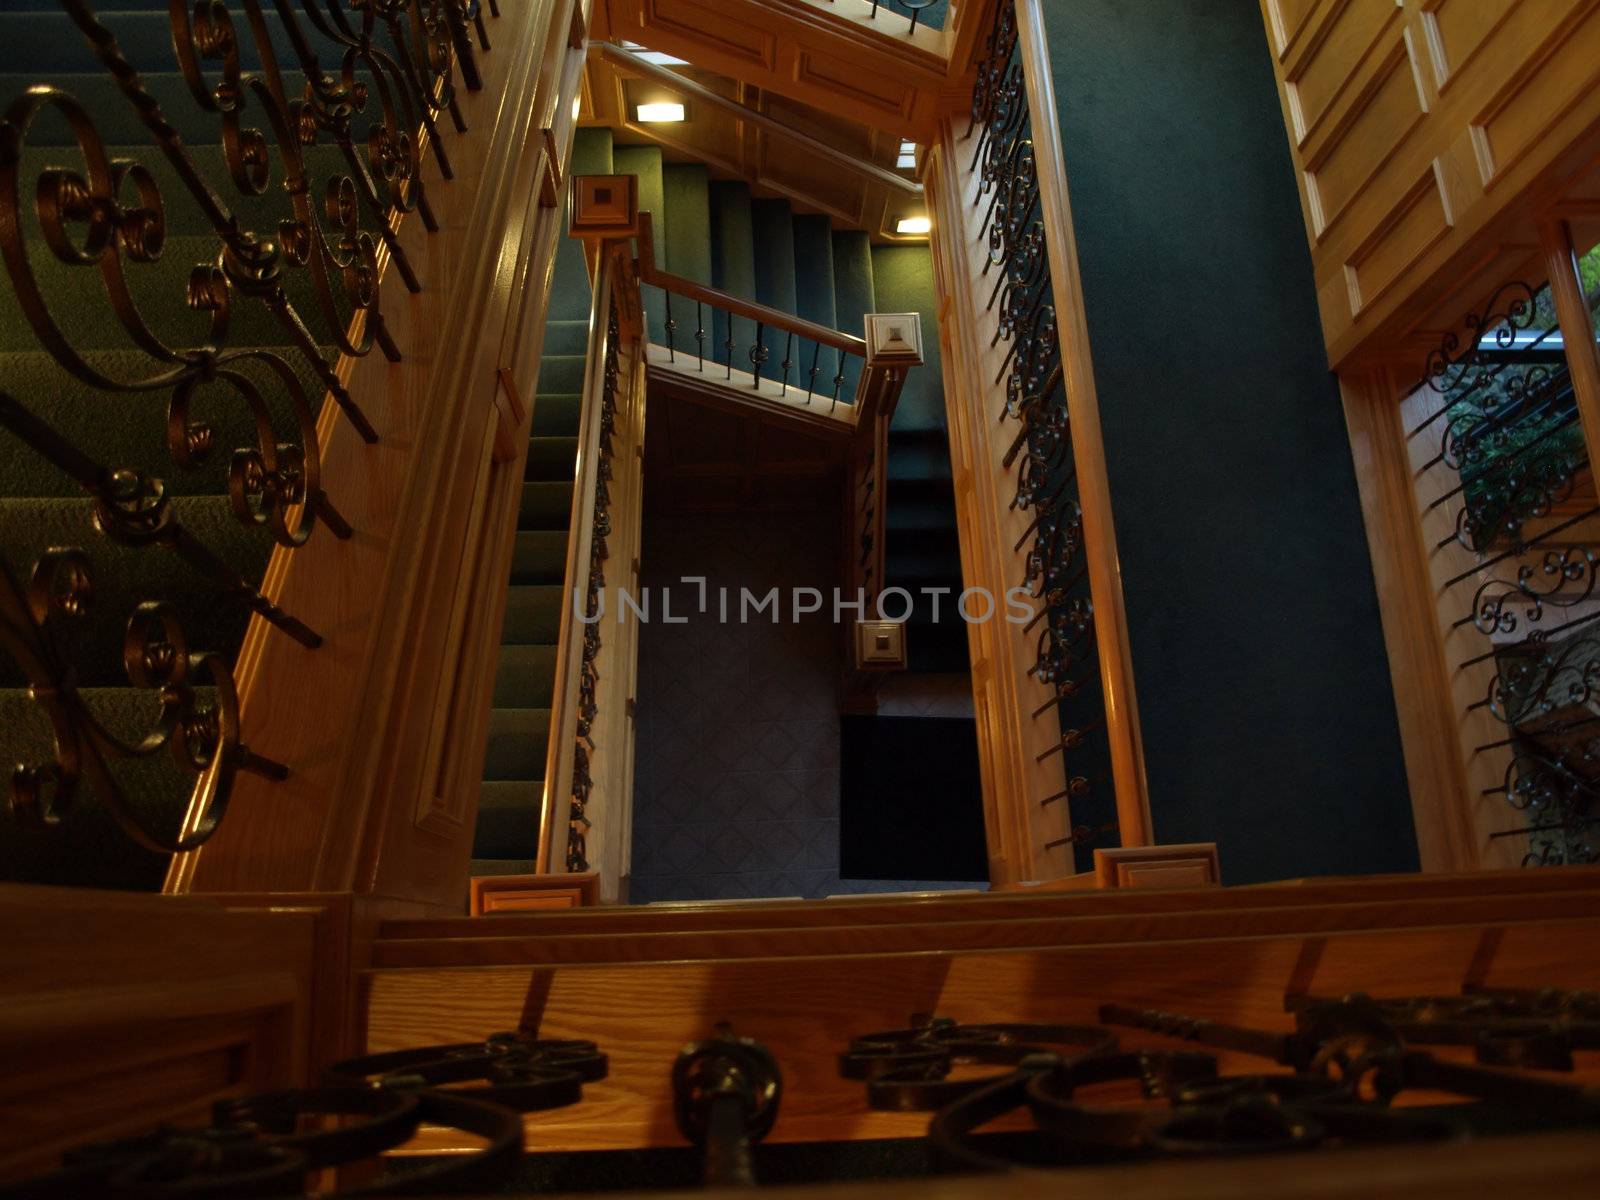 An interior stairway in an office building. Wood and wrought iron railings.